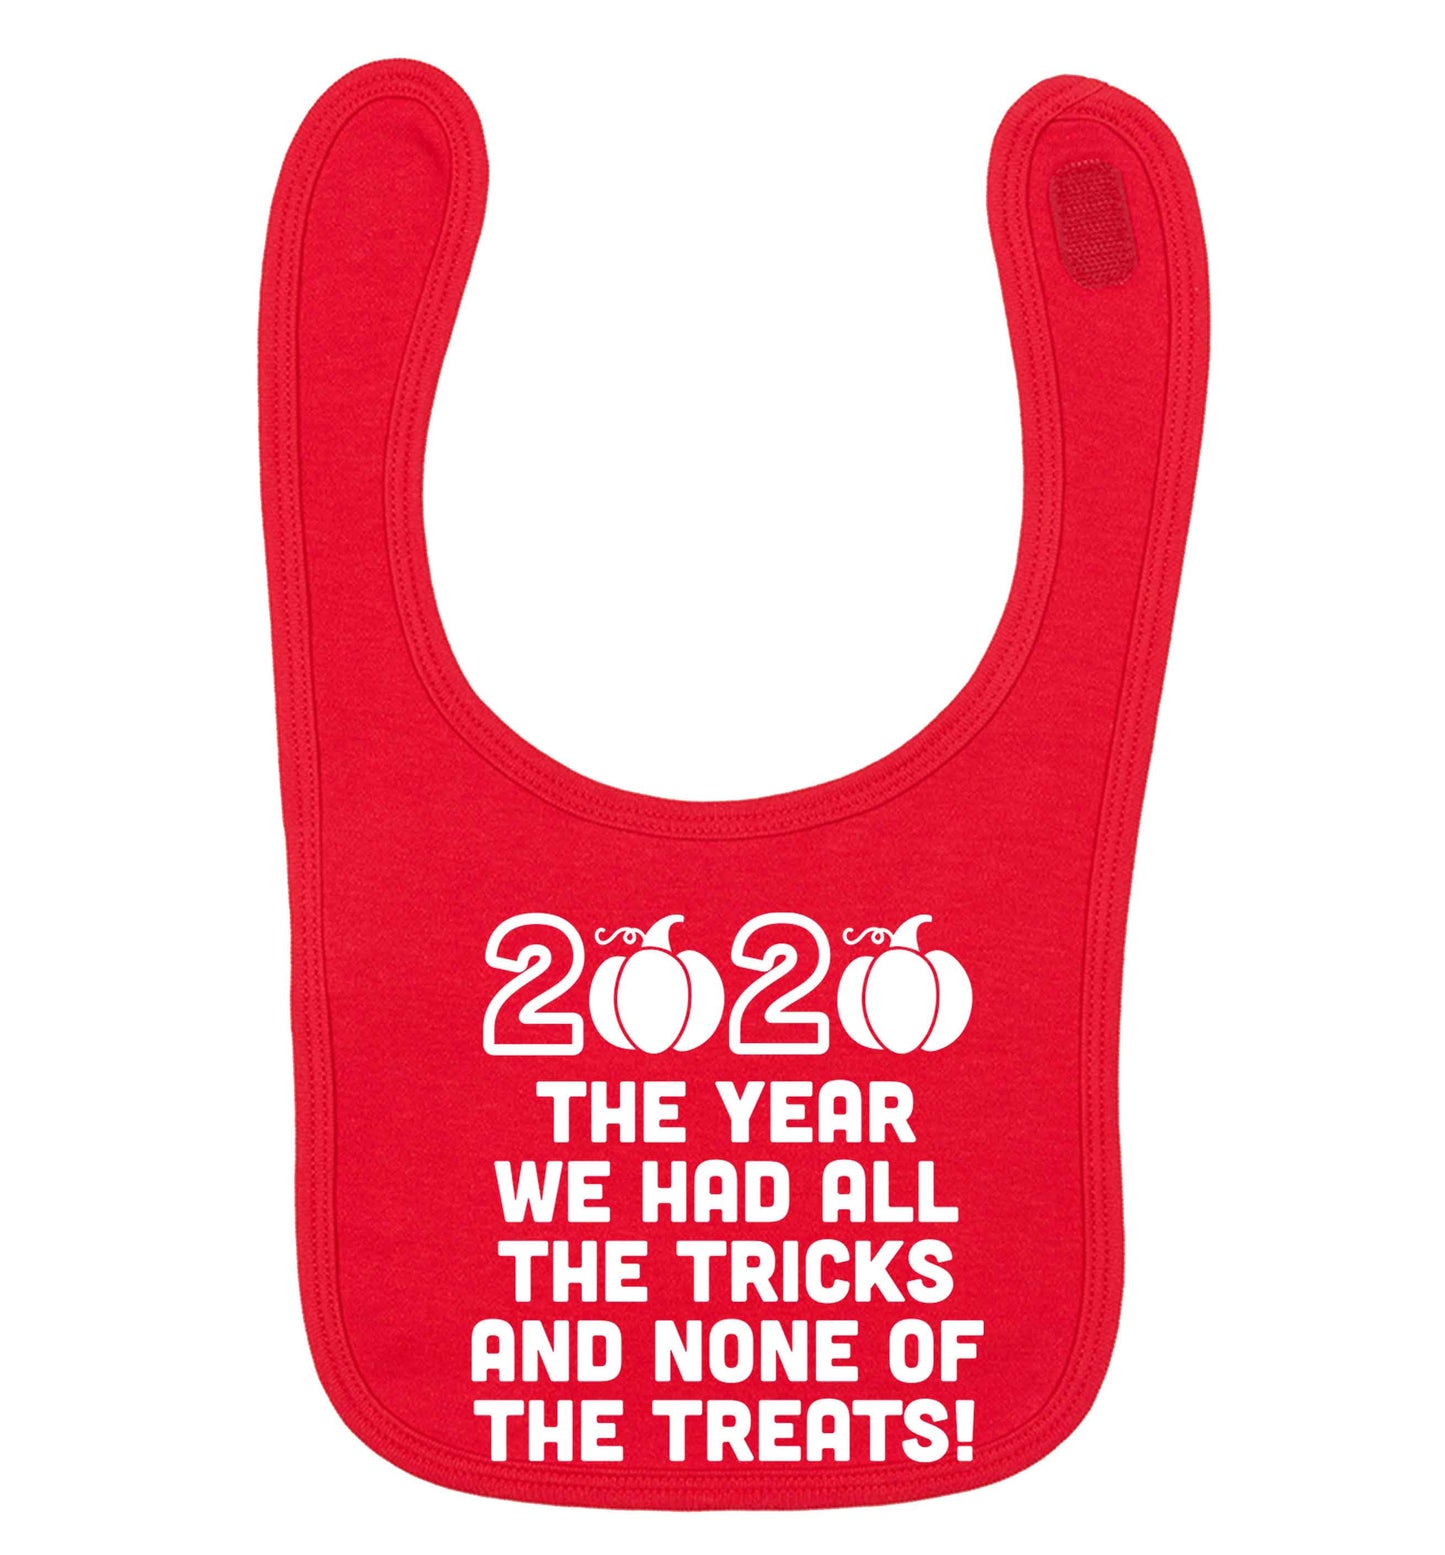 2020 The year we had all of the tricks and none of the treats red baby bib